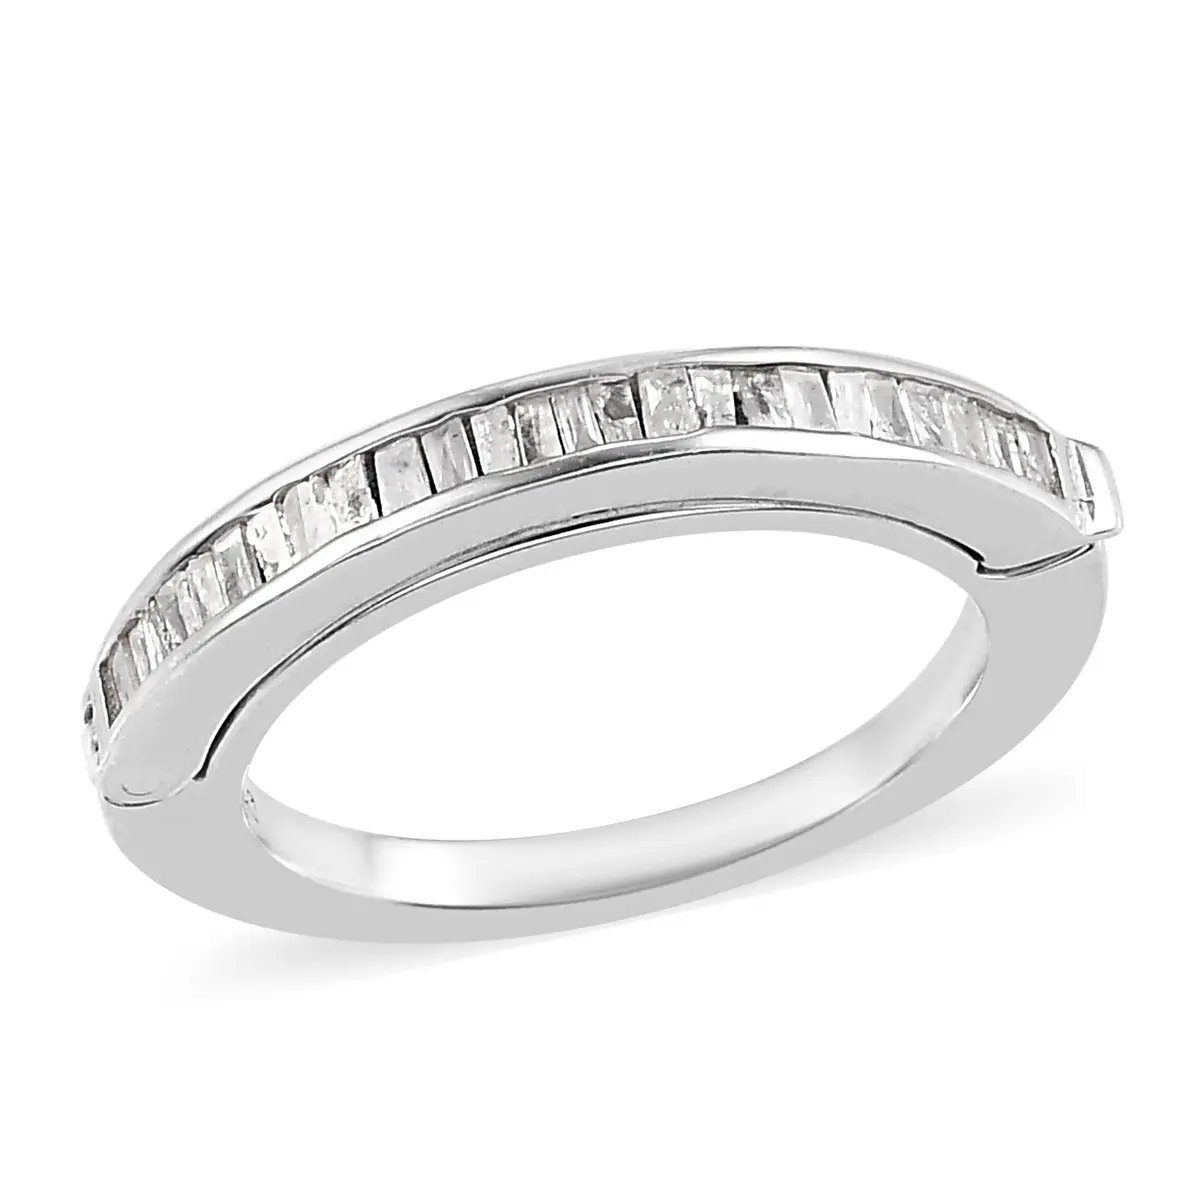 Band rings are pretty famous for their versatile personality jewelry also pique interest for their symbolical meaning